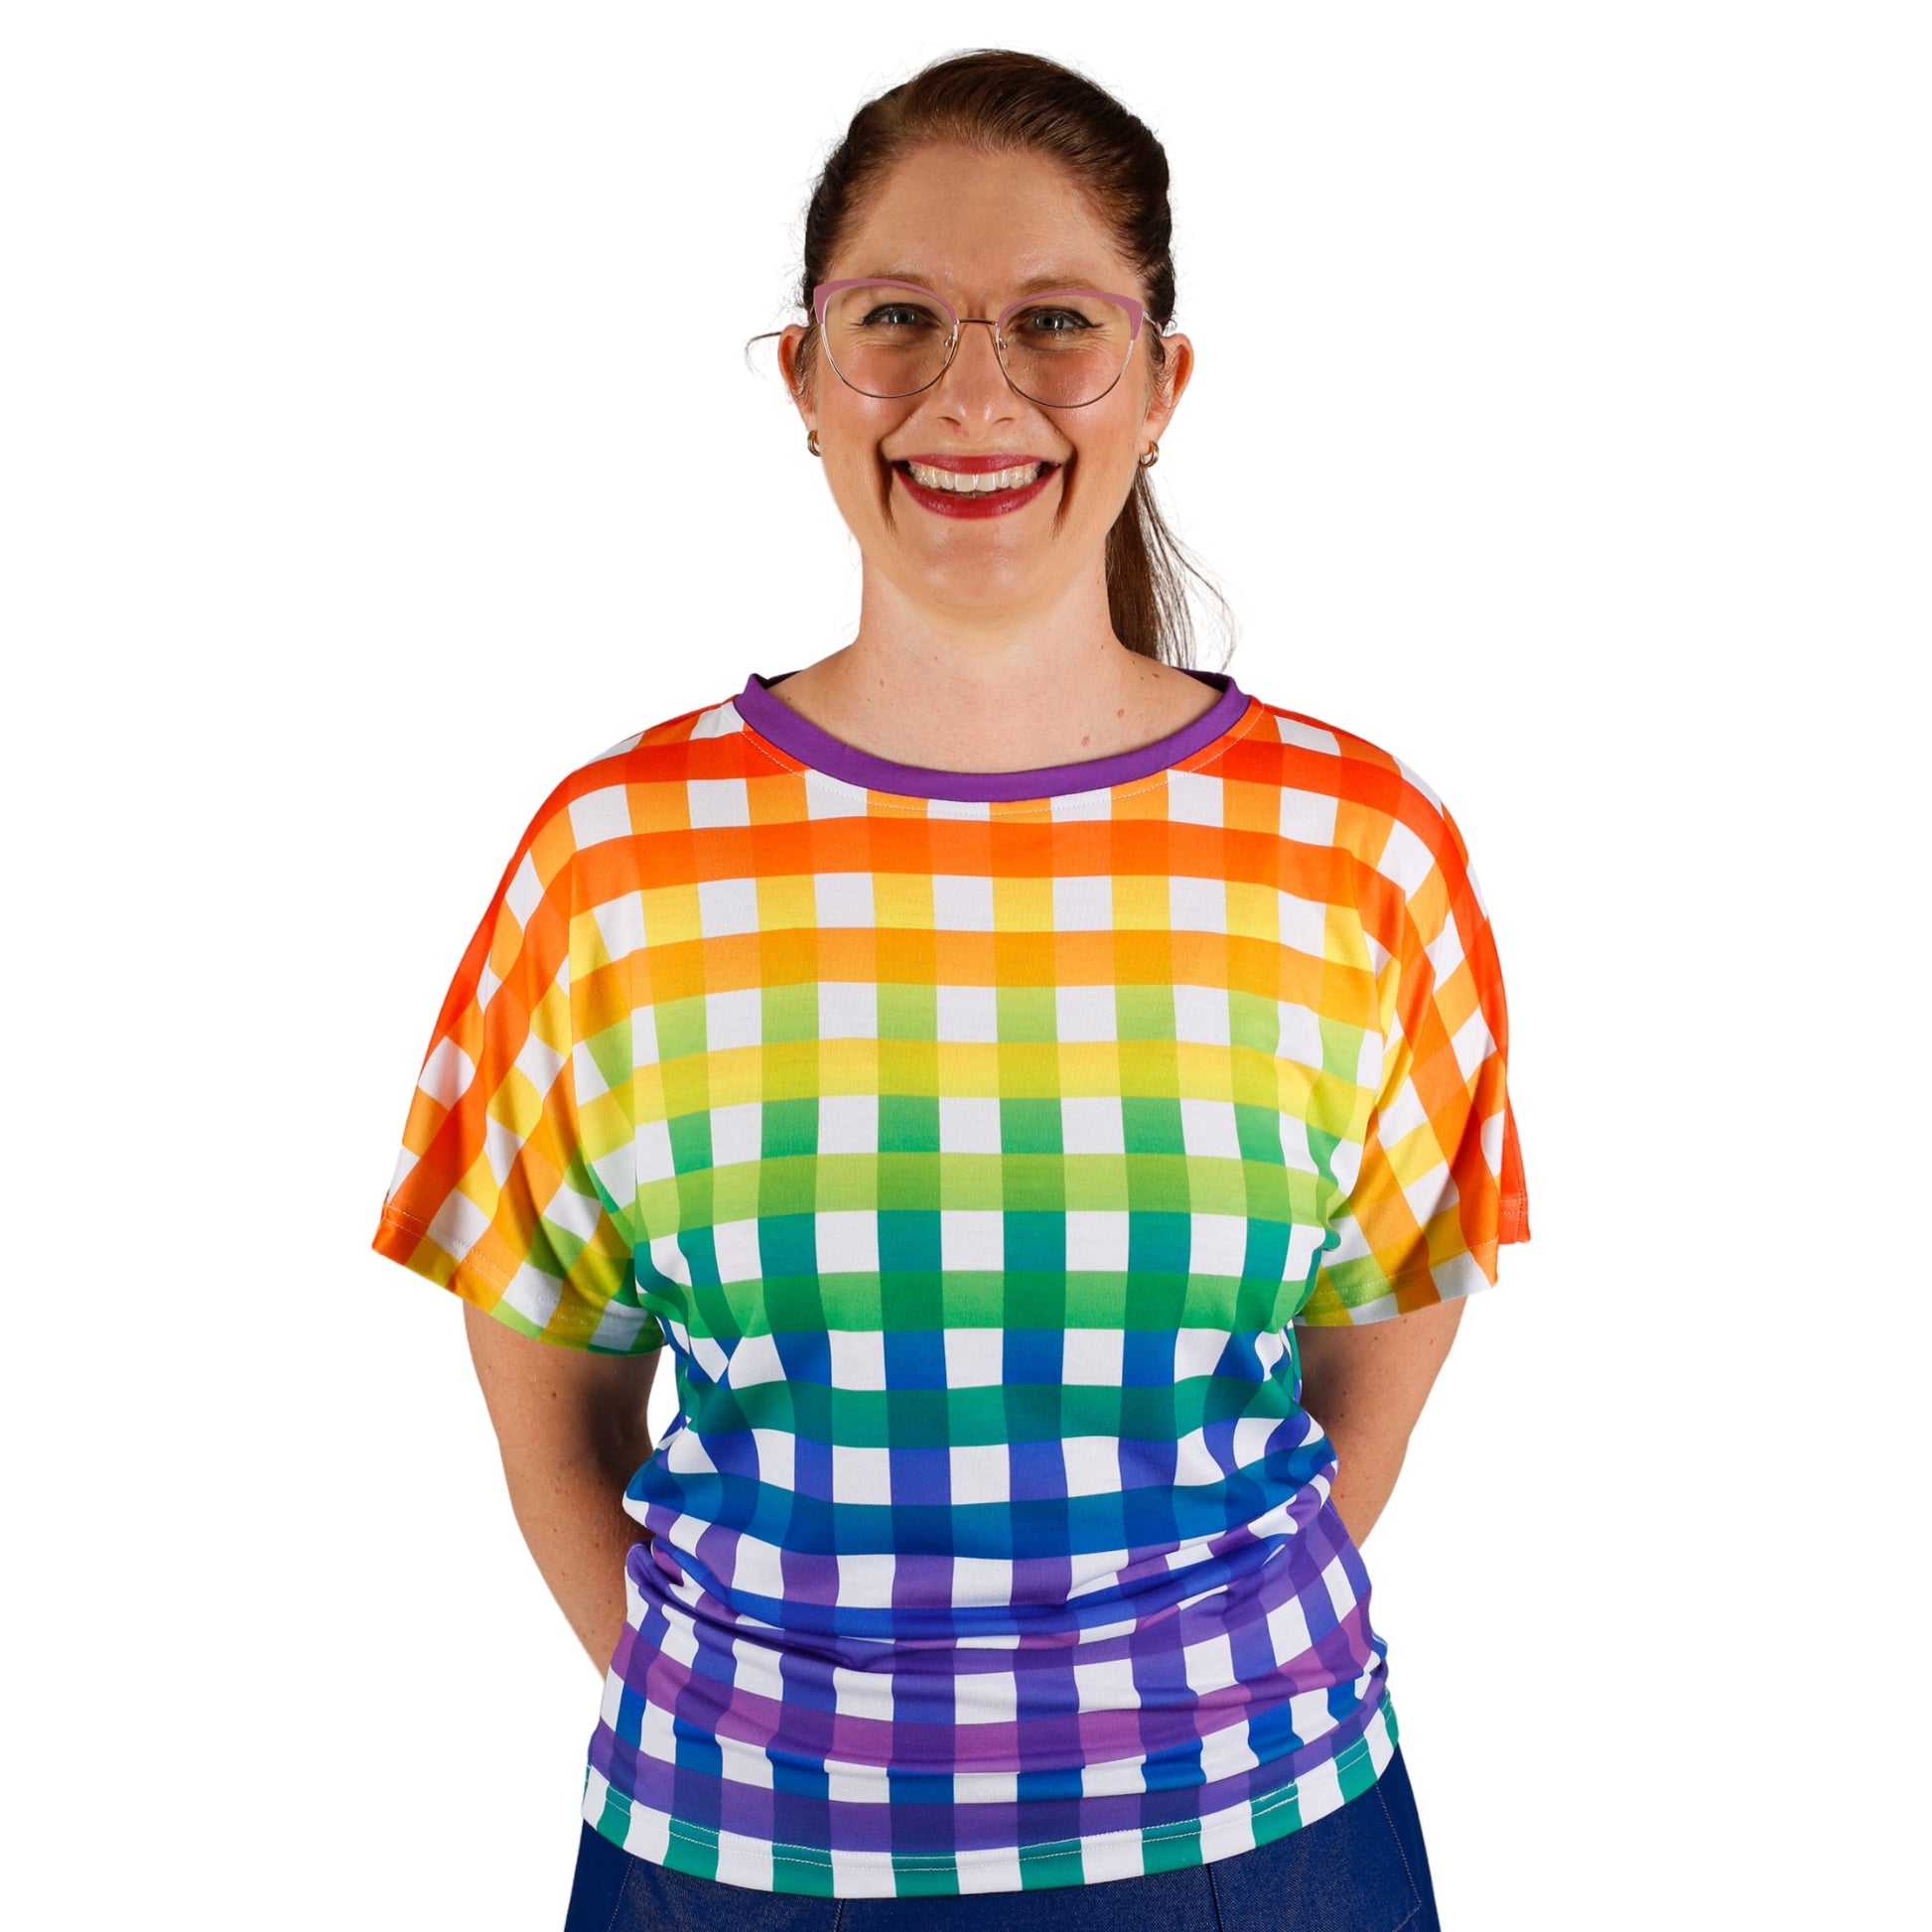 Rainbow Gingham Batwing Top by RainbowsAndFairies.com.au (Check - Picnic - Pride - Knit Top - Vintage Inspired - Retro Shirt - Kitsch) - SKU: CL_BATOP_GINGH_RBW - Pic-01